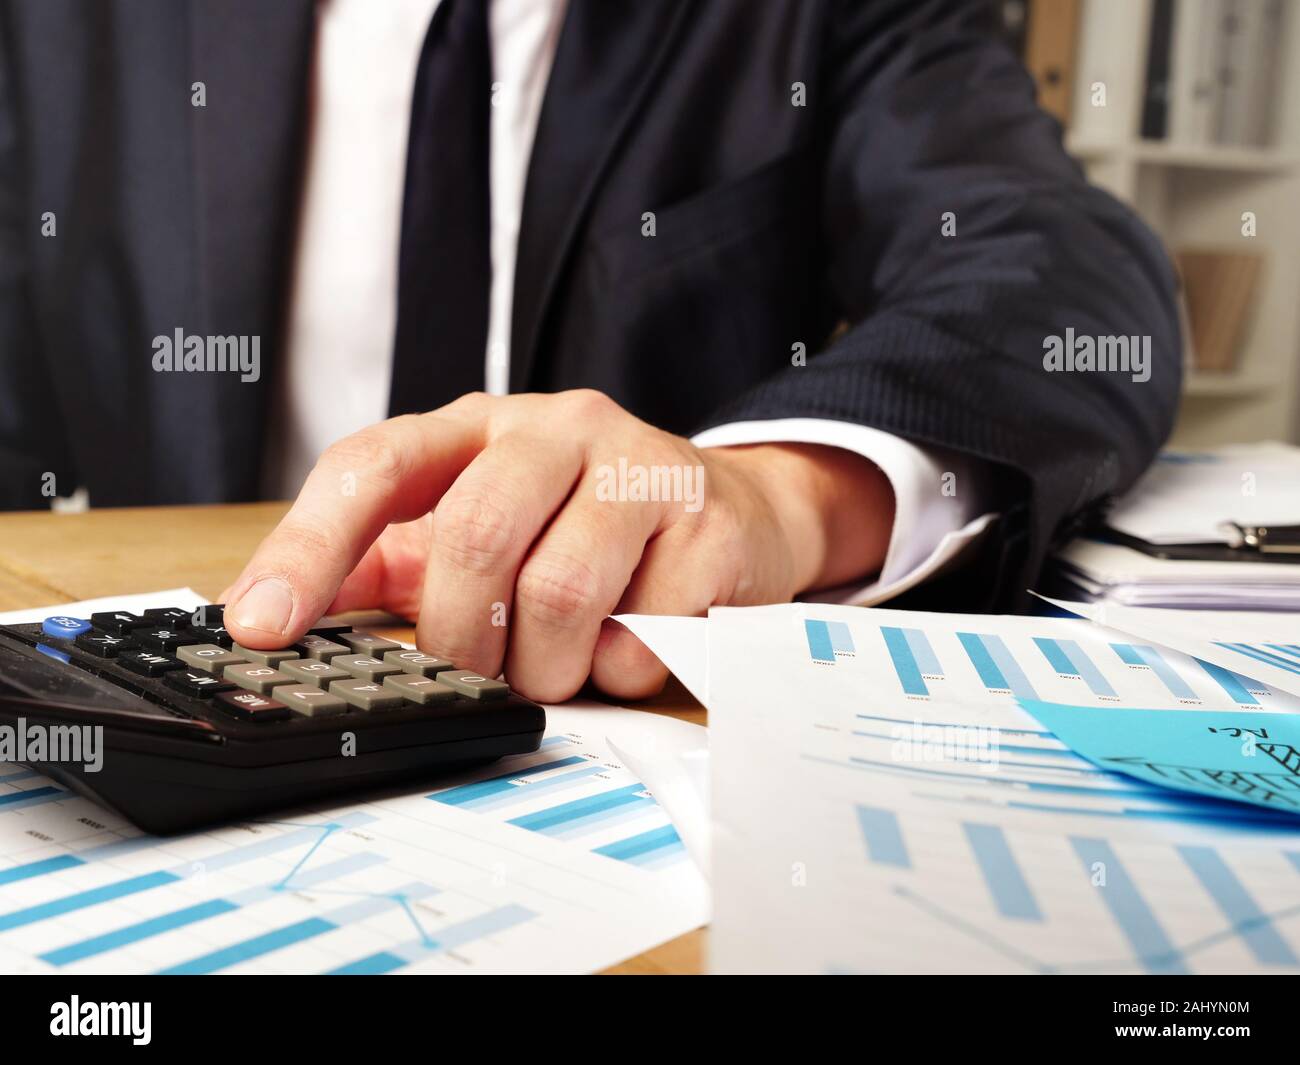 Man is calculating annual financial report with calculator and stack of paper. Stock Photo